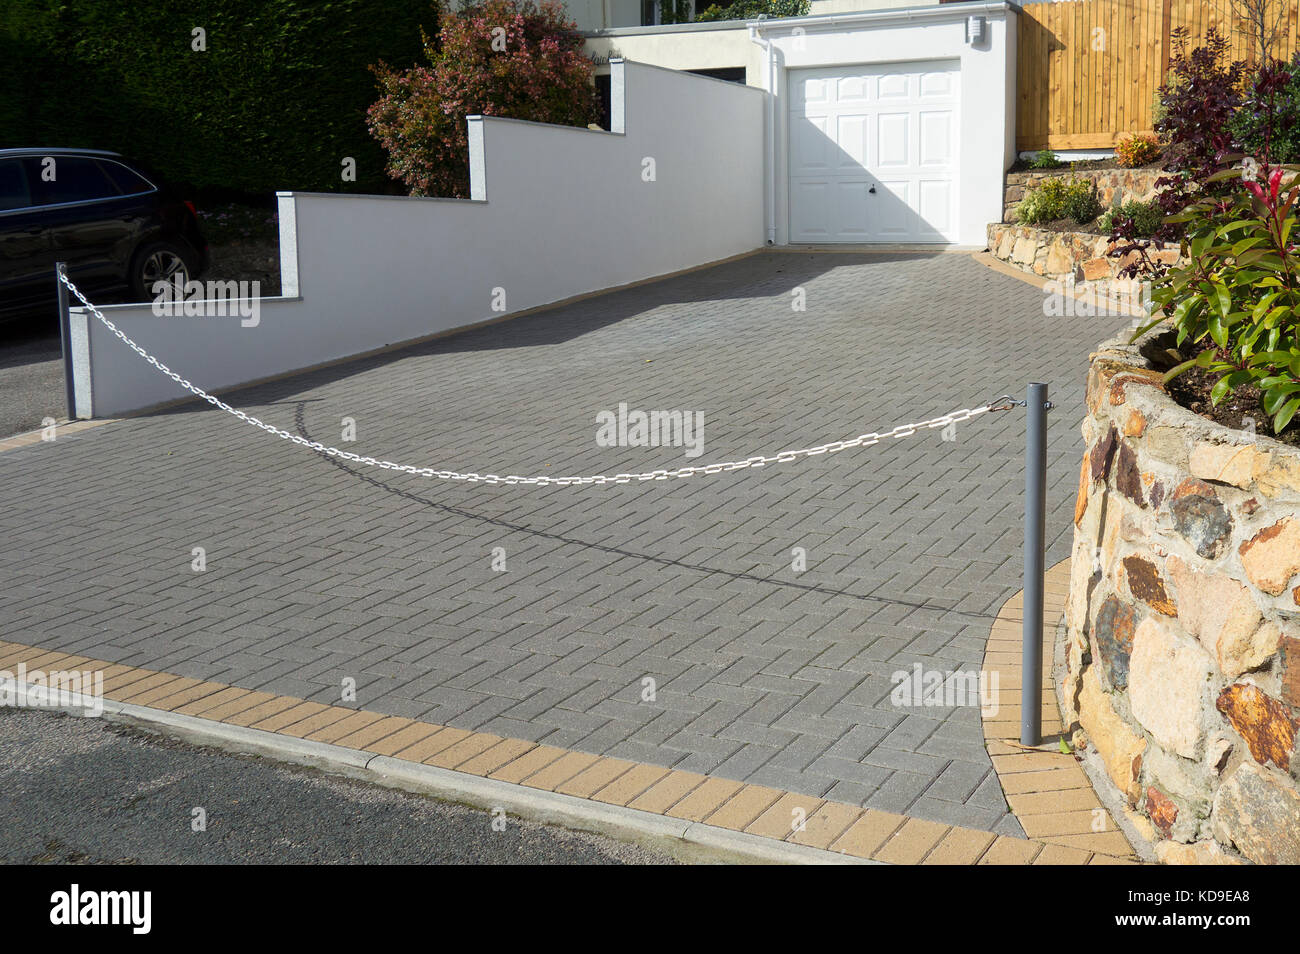 a garden paved with concrete blocks to make a driveway. Stock Photo